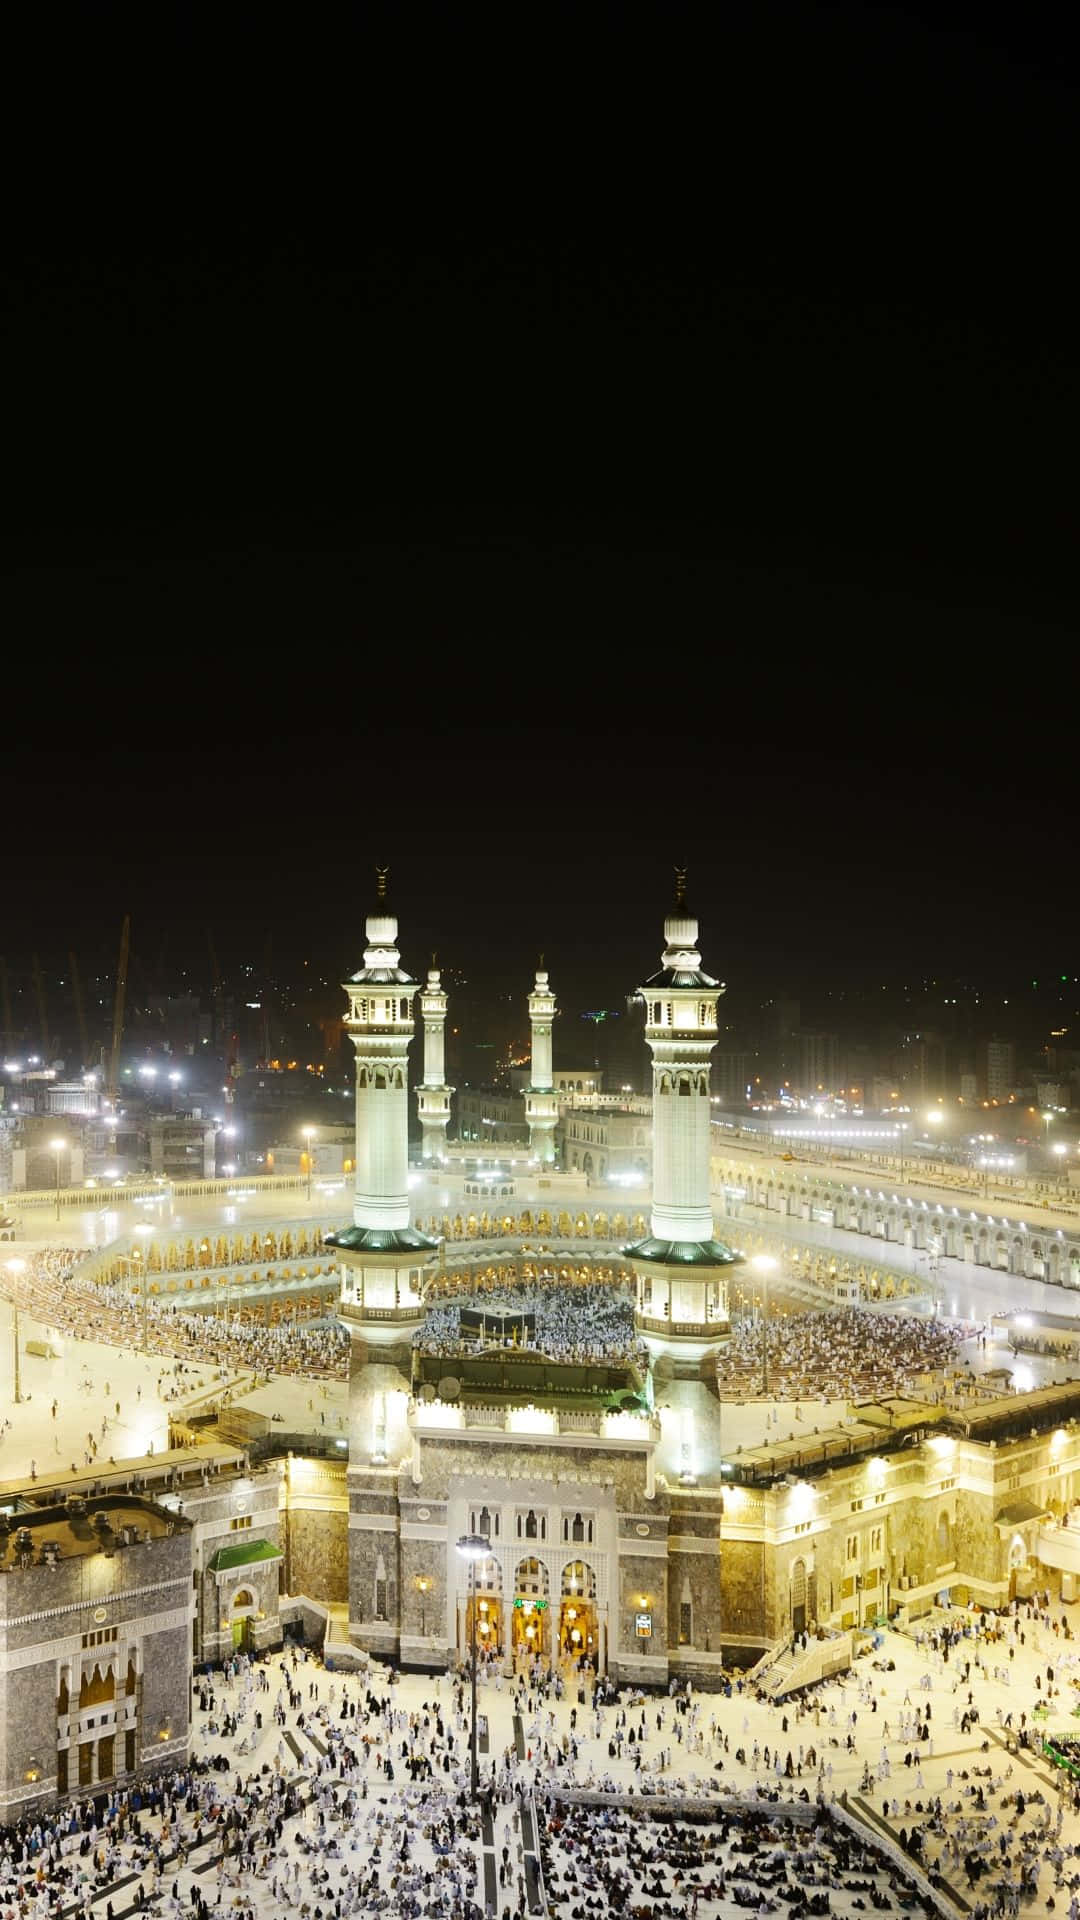 The Grand Mosque In Mecca At Night